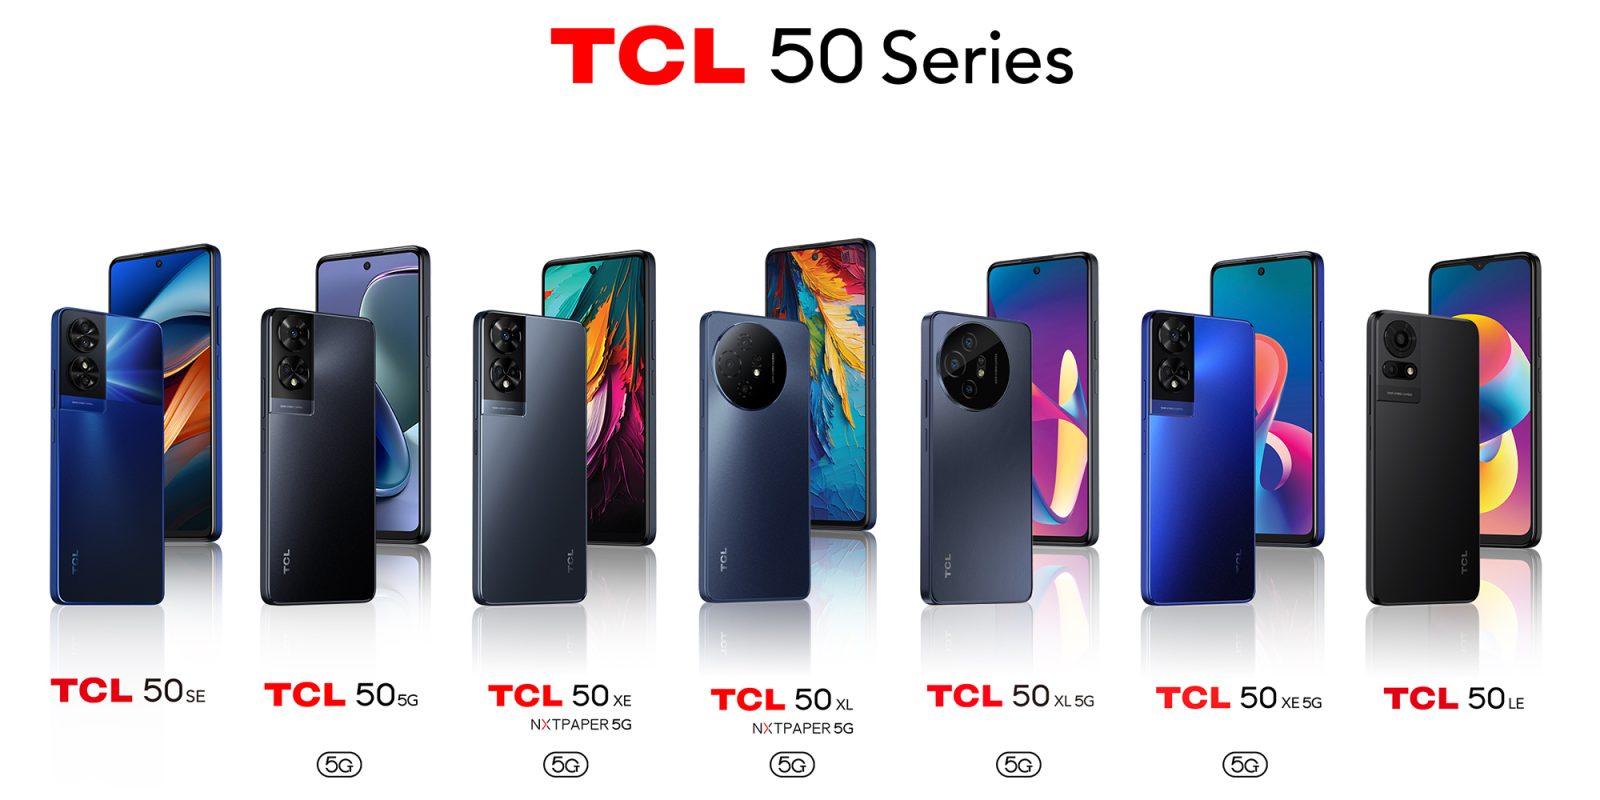 TCL just announced seven new Android phones